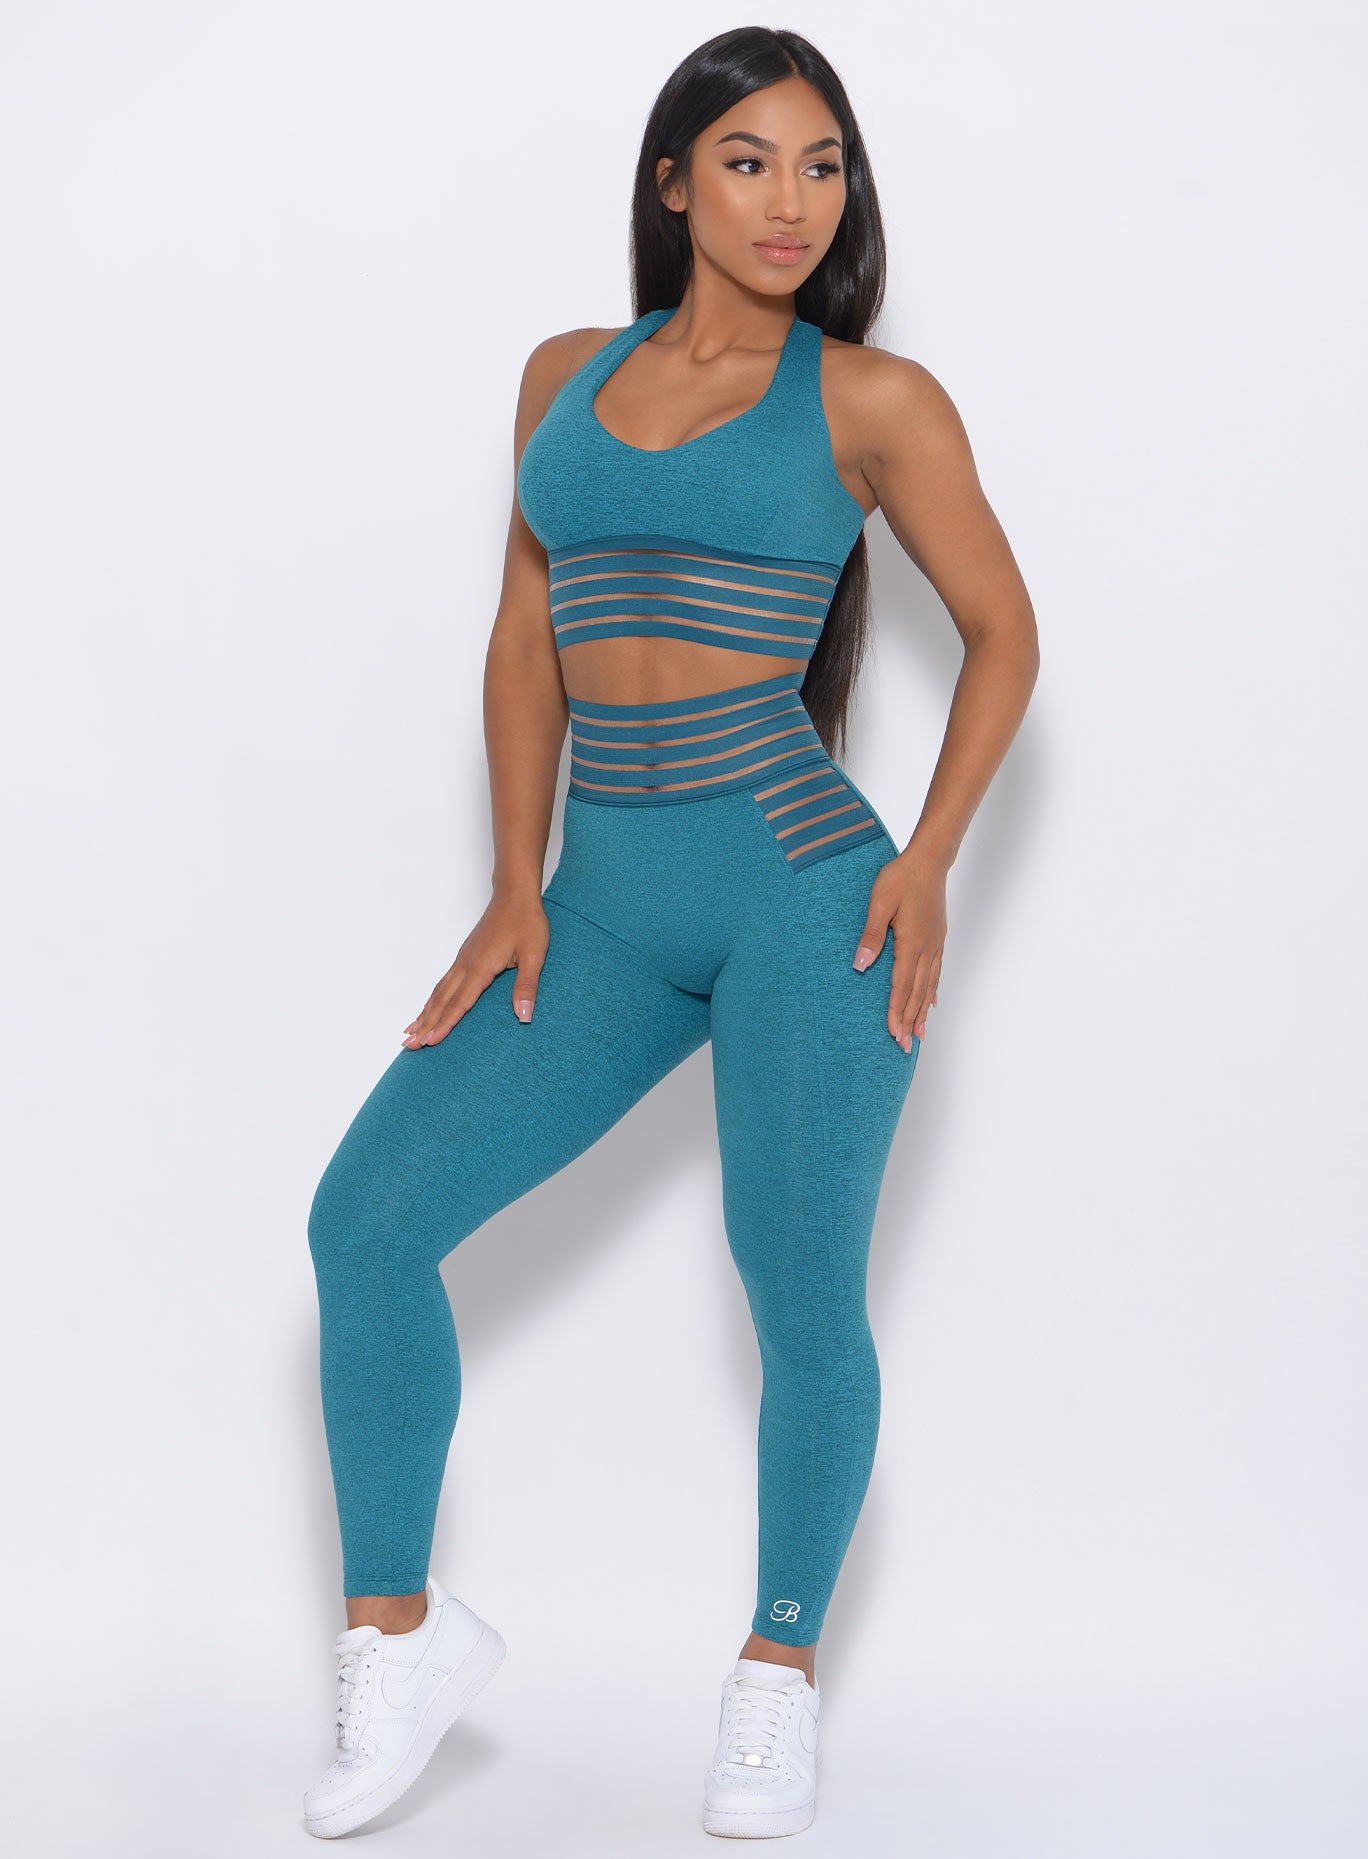 Front view of the model with her hands on thighs wearing our statement leggings in seafoam color and a matching bra